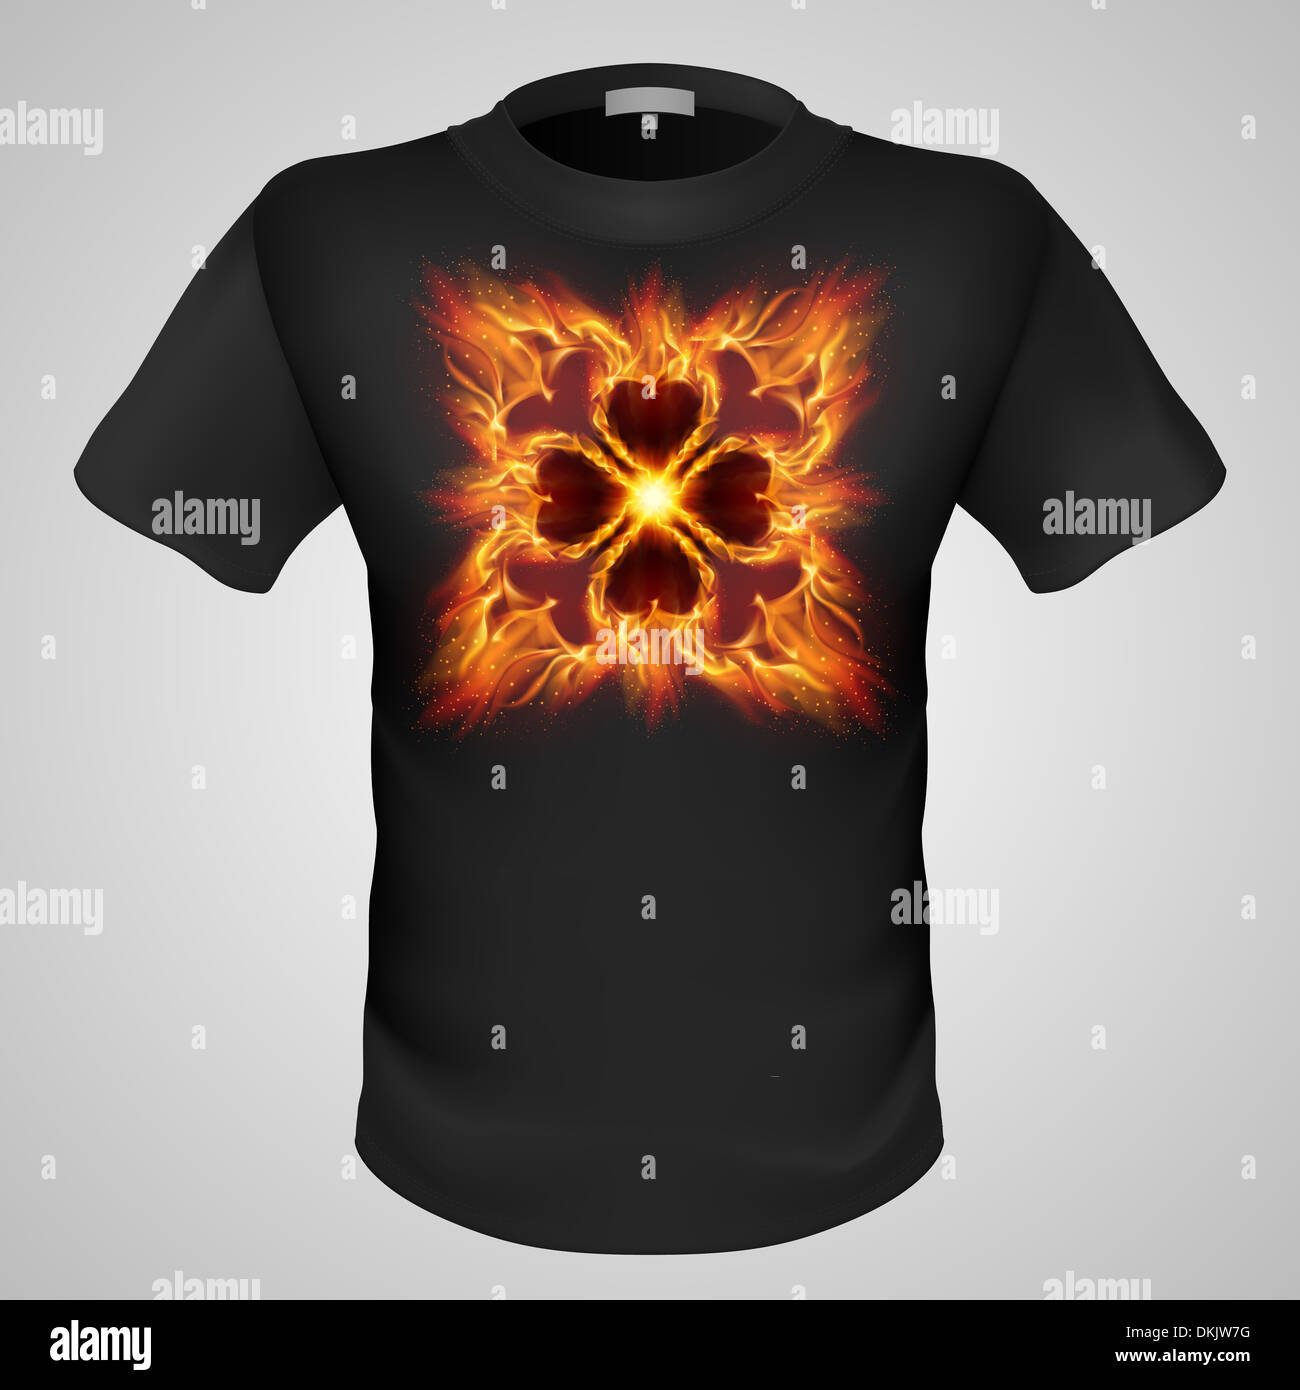 Black male t-shirt with fiery gothic pattern print on grey background. Stock Photo